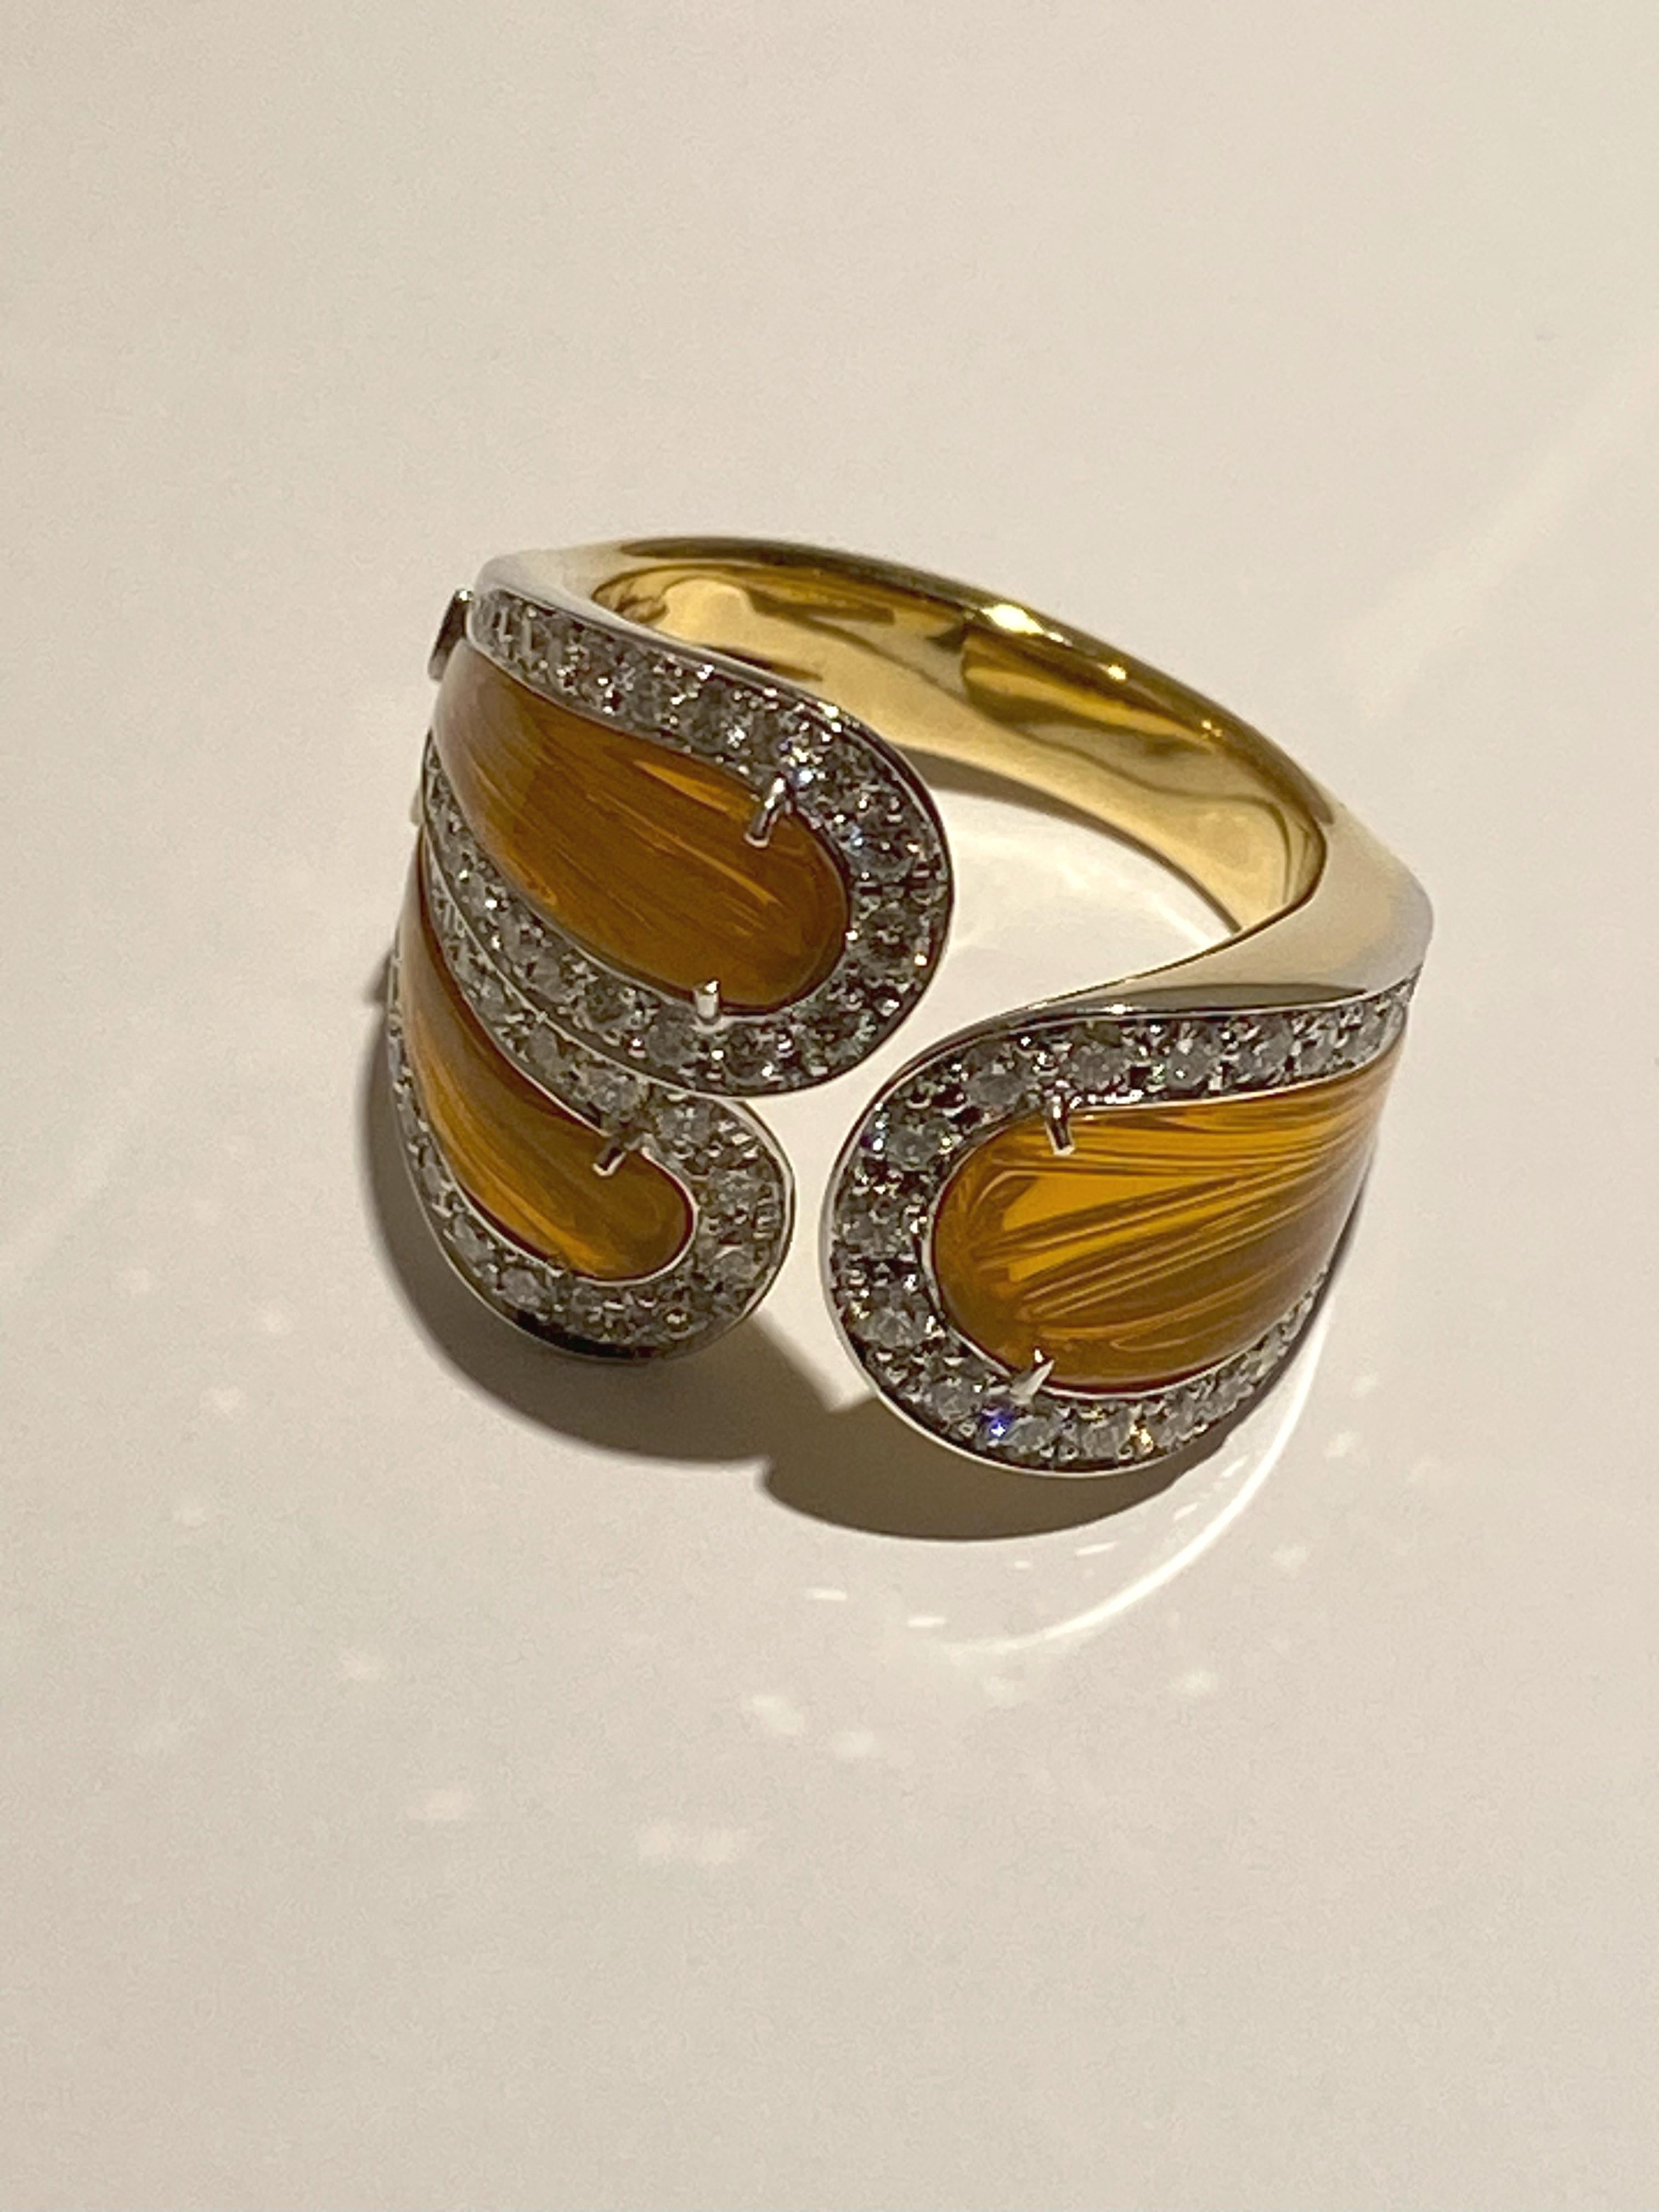 Uncut SCAVIA Opal Inlays Diamonds Pavé 18K White and Yellow Gold Ring For Sale